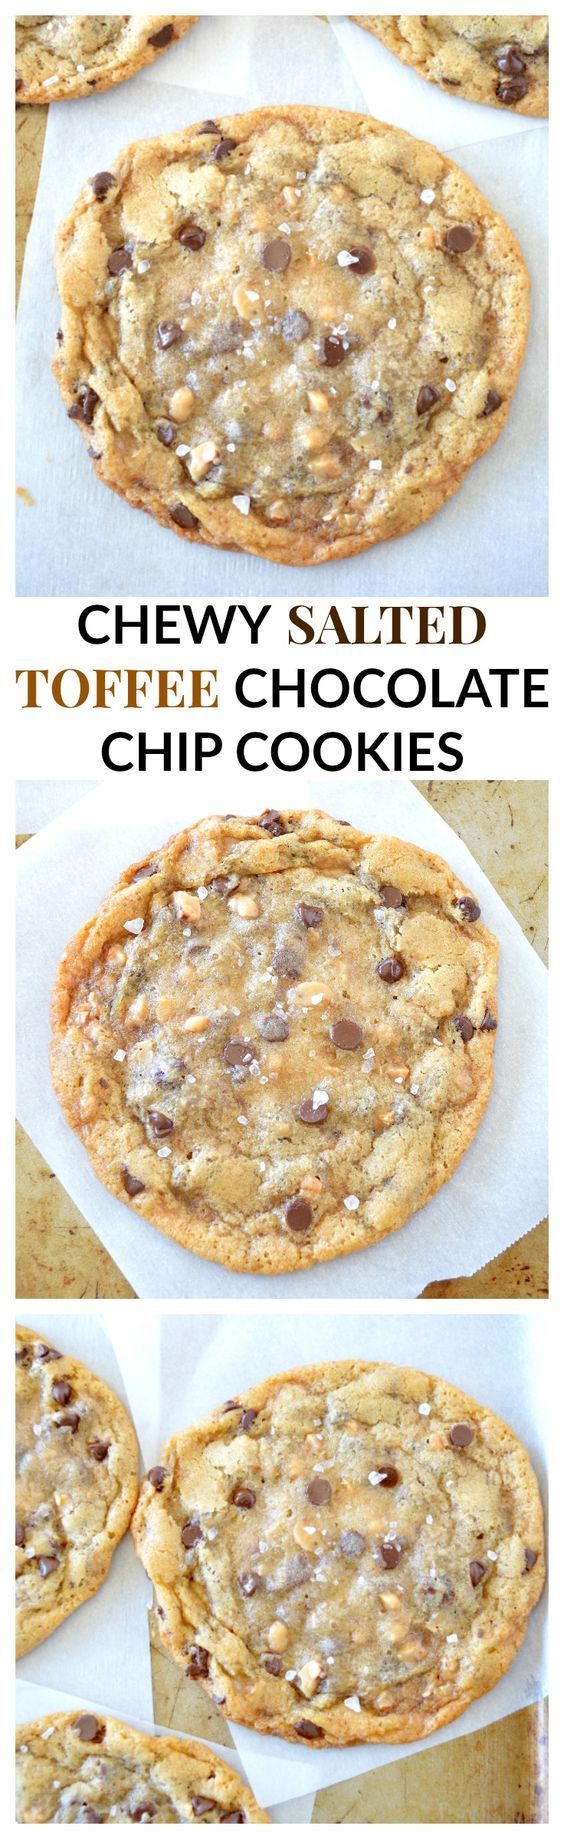 Chewy Salted Toffee Chocolate Chip Cookies